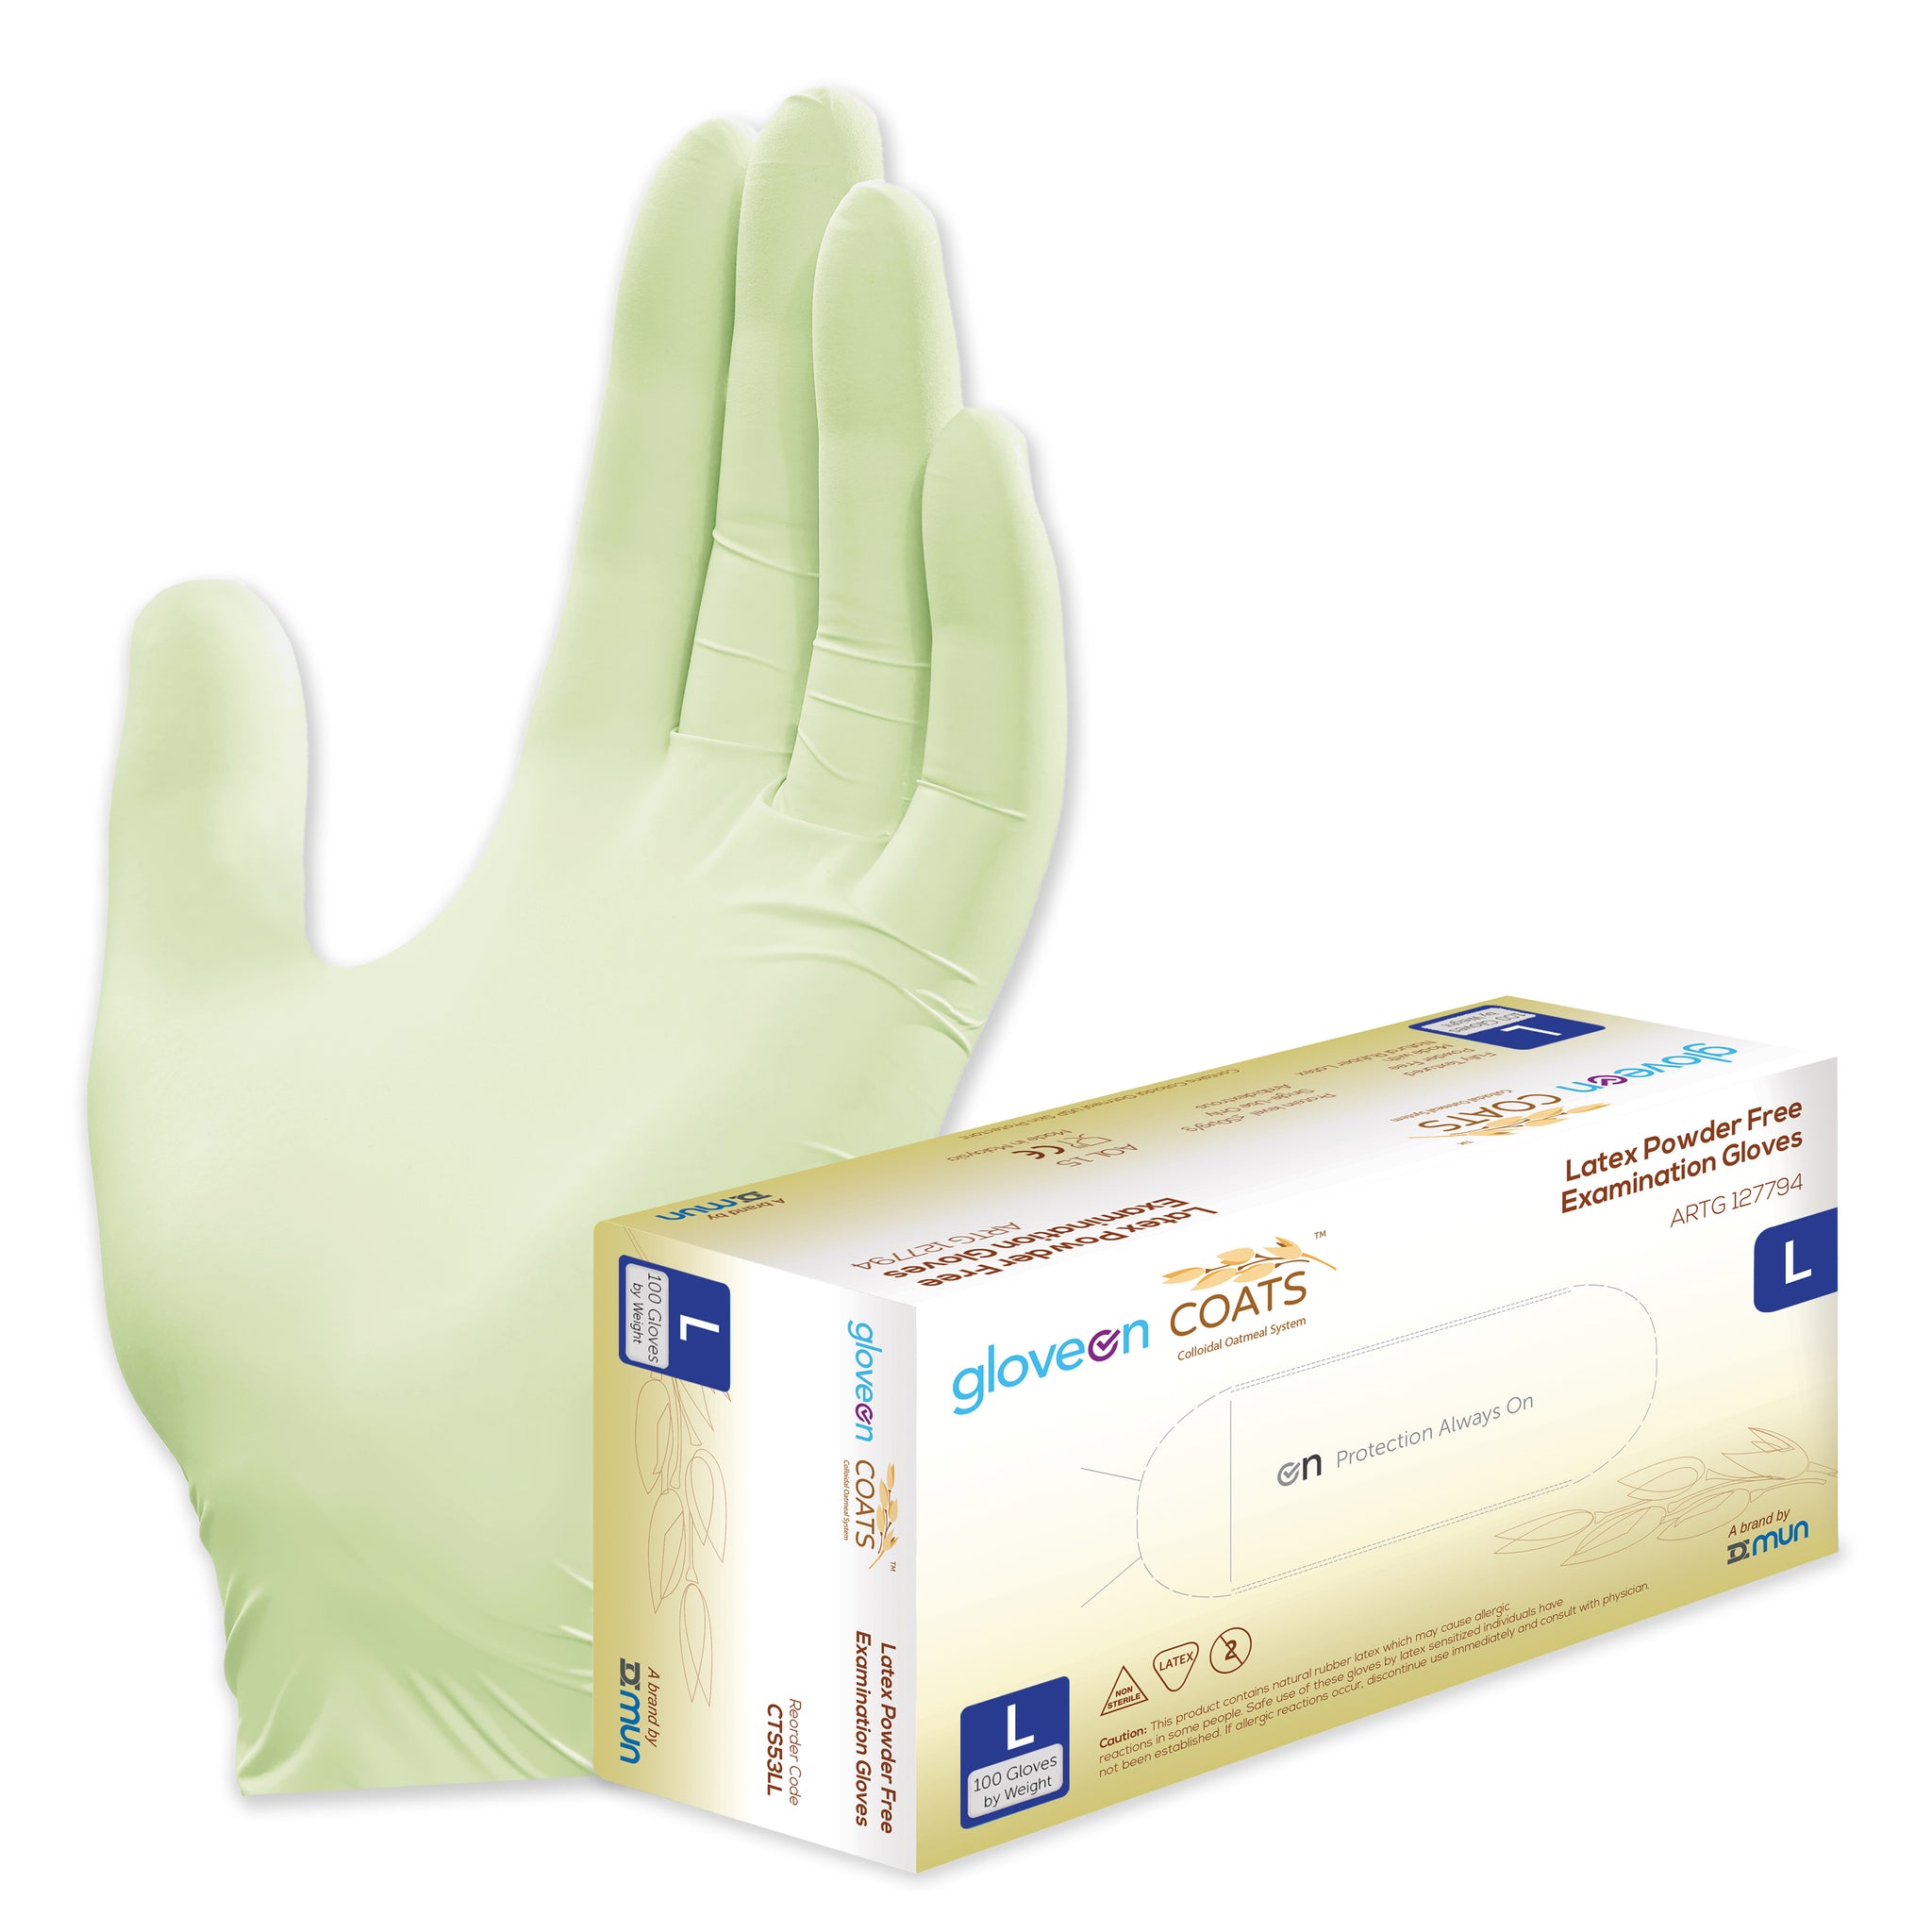 Latex Exam Gloves with Colloidal Oatmeal System, Powder Free, Non-Sterile, Fully Textured, Colloidal Oats Coated, Standard Cuff, Lime Green - Box of 100, L